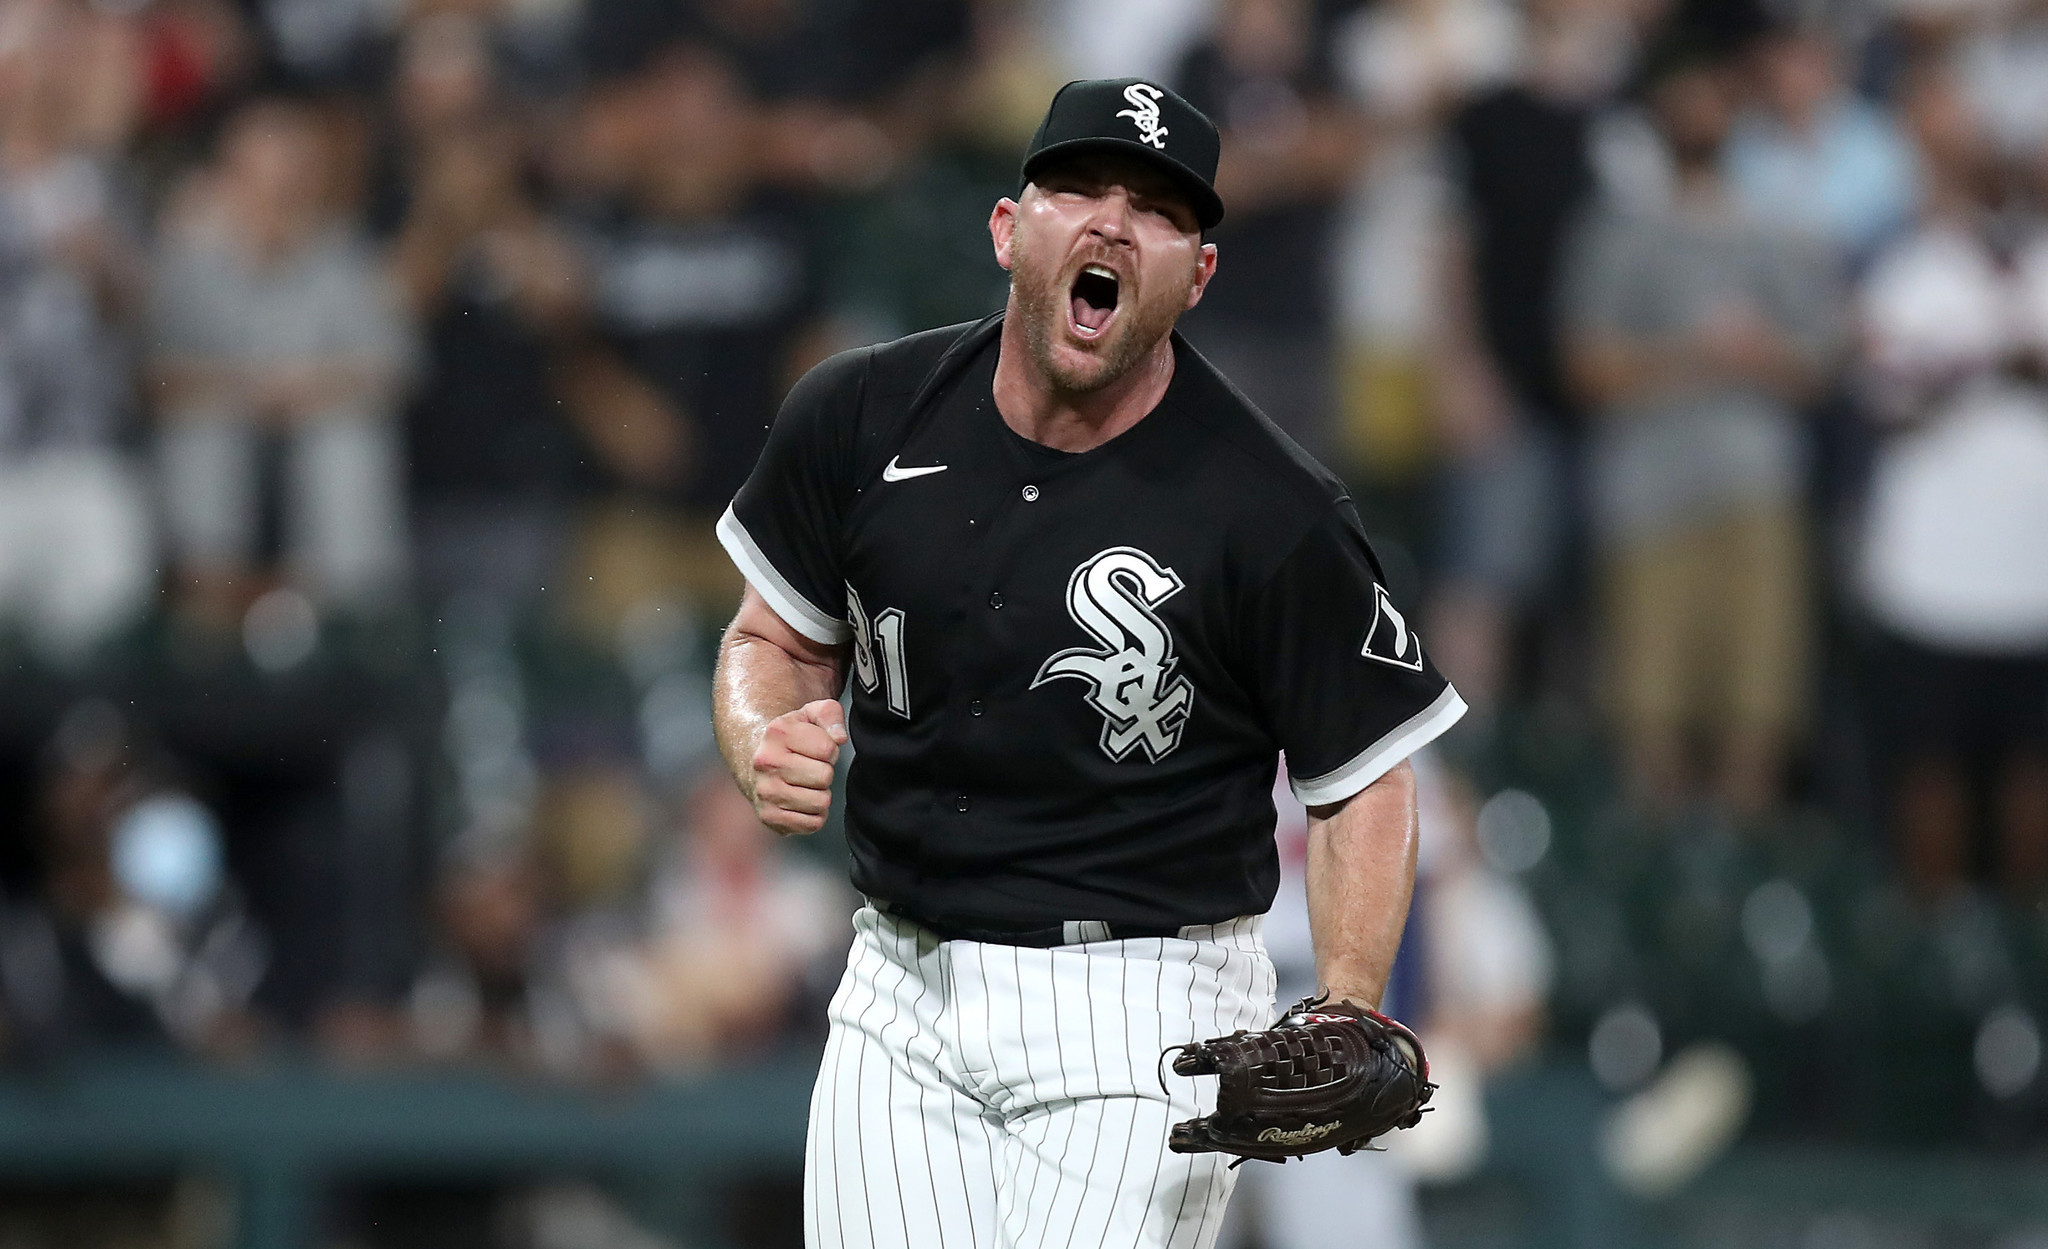 MLB All-Star Game: 3 Chicago Cubs, 1 White Sox player picked